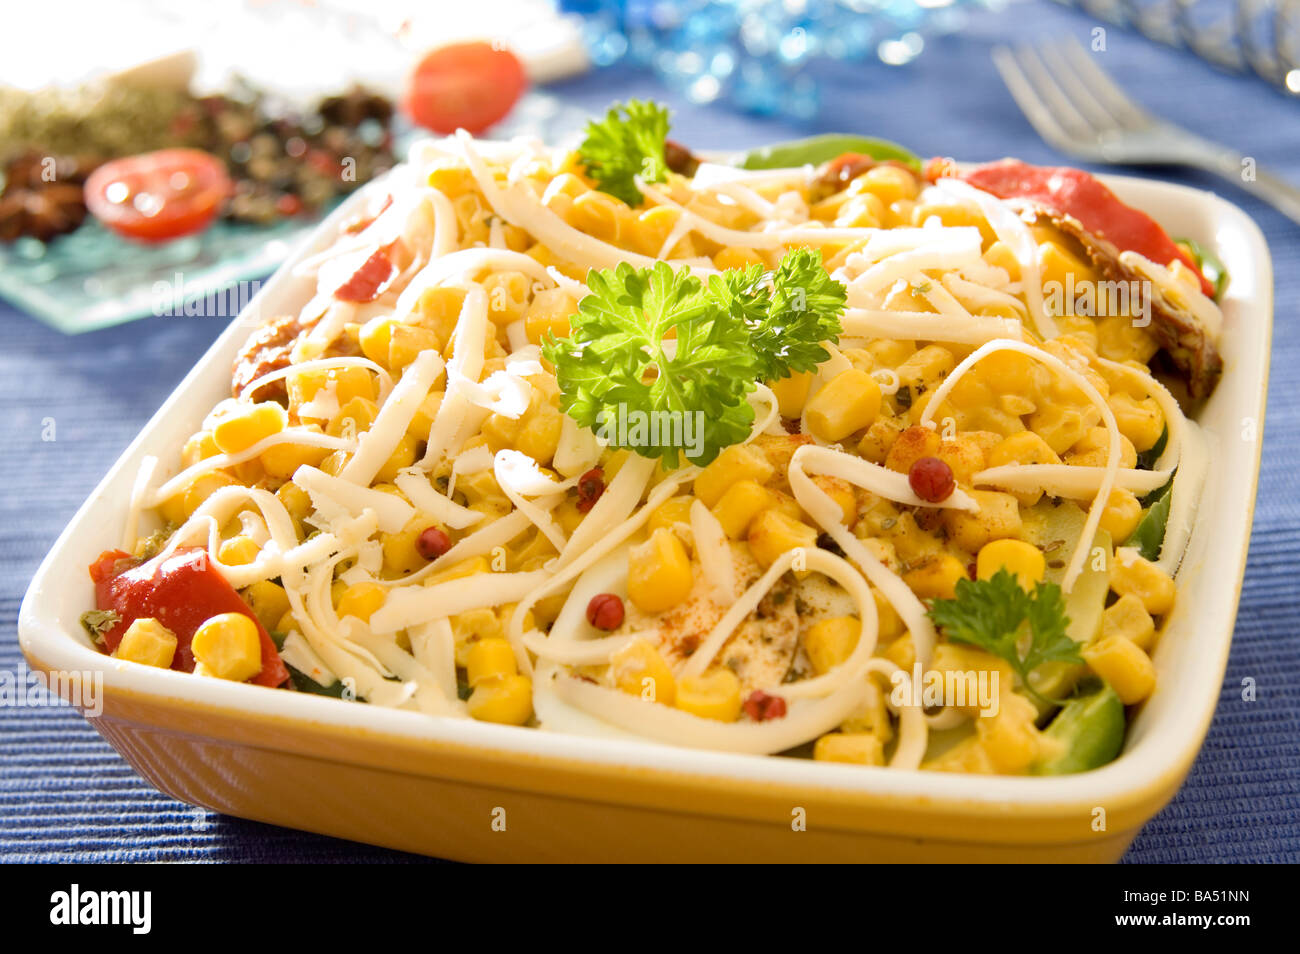 Vegetable casserole in a bowl Stock Photo